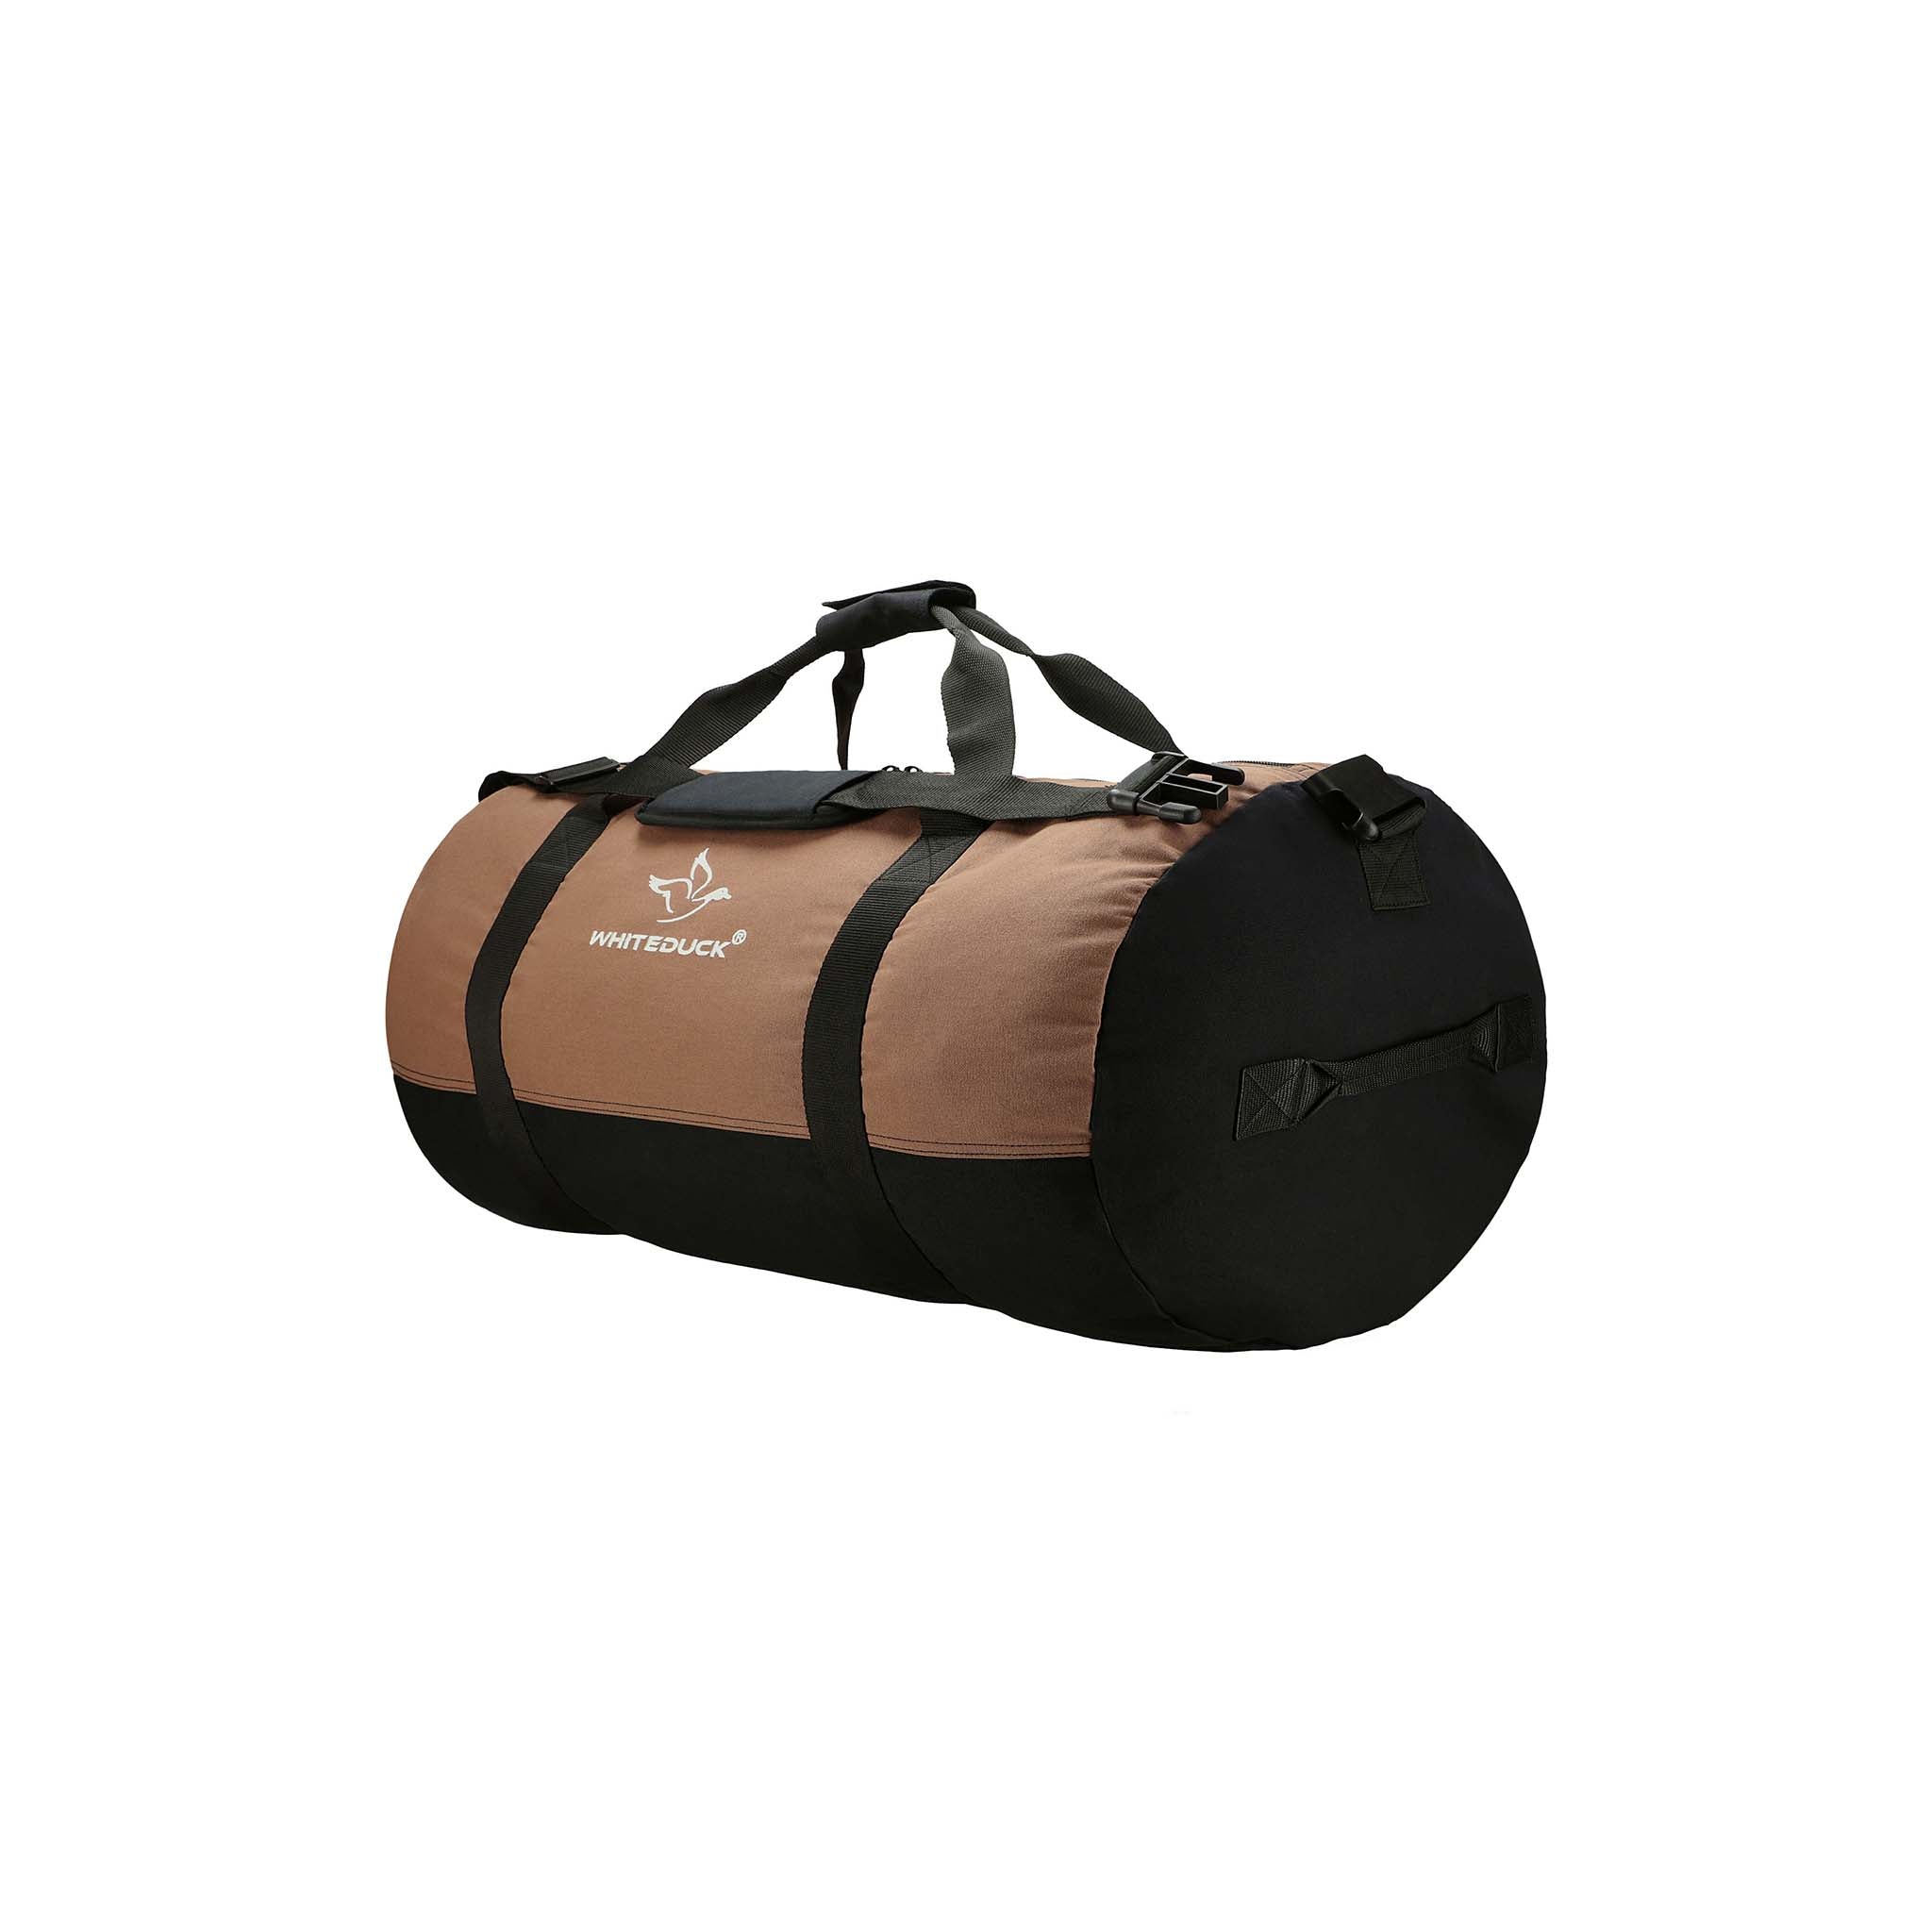  WHITEDUCK Heavy Duty Canvas Duffel Bag for Men and Women -  Foldable Military Army Style Duffel Bag, with Full Length Zipper- Outdoors